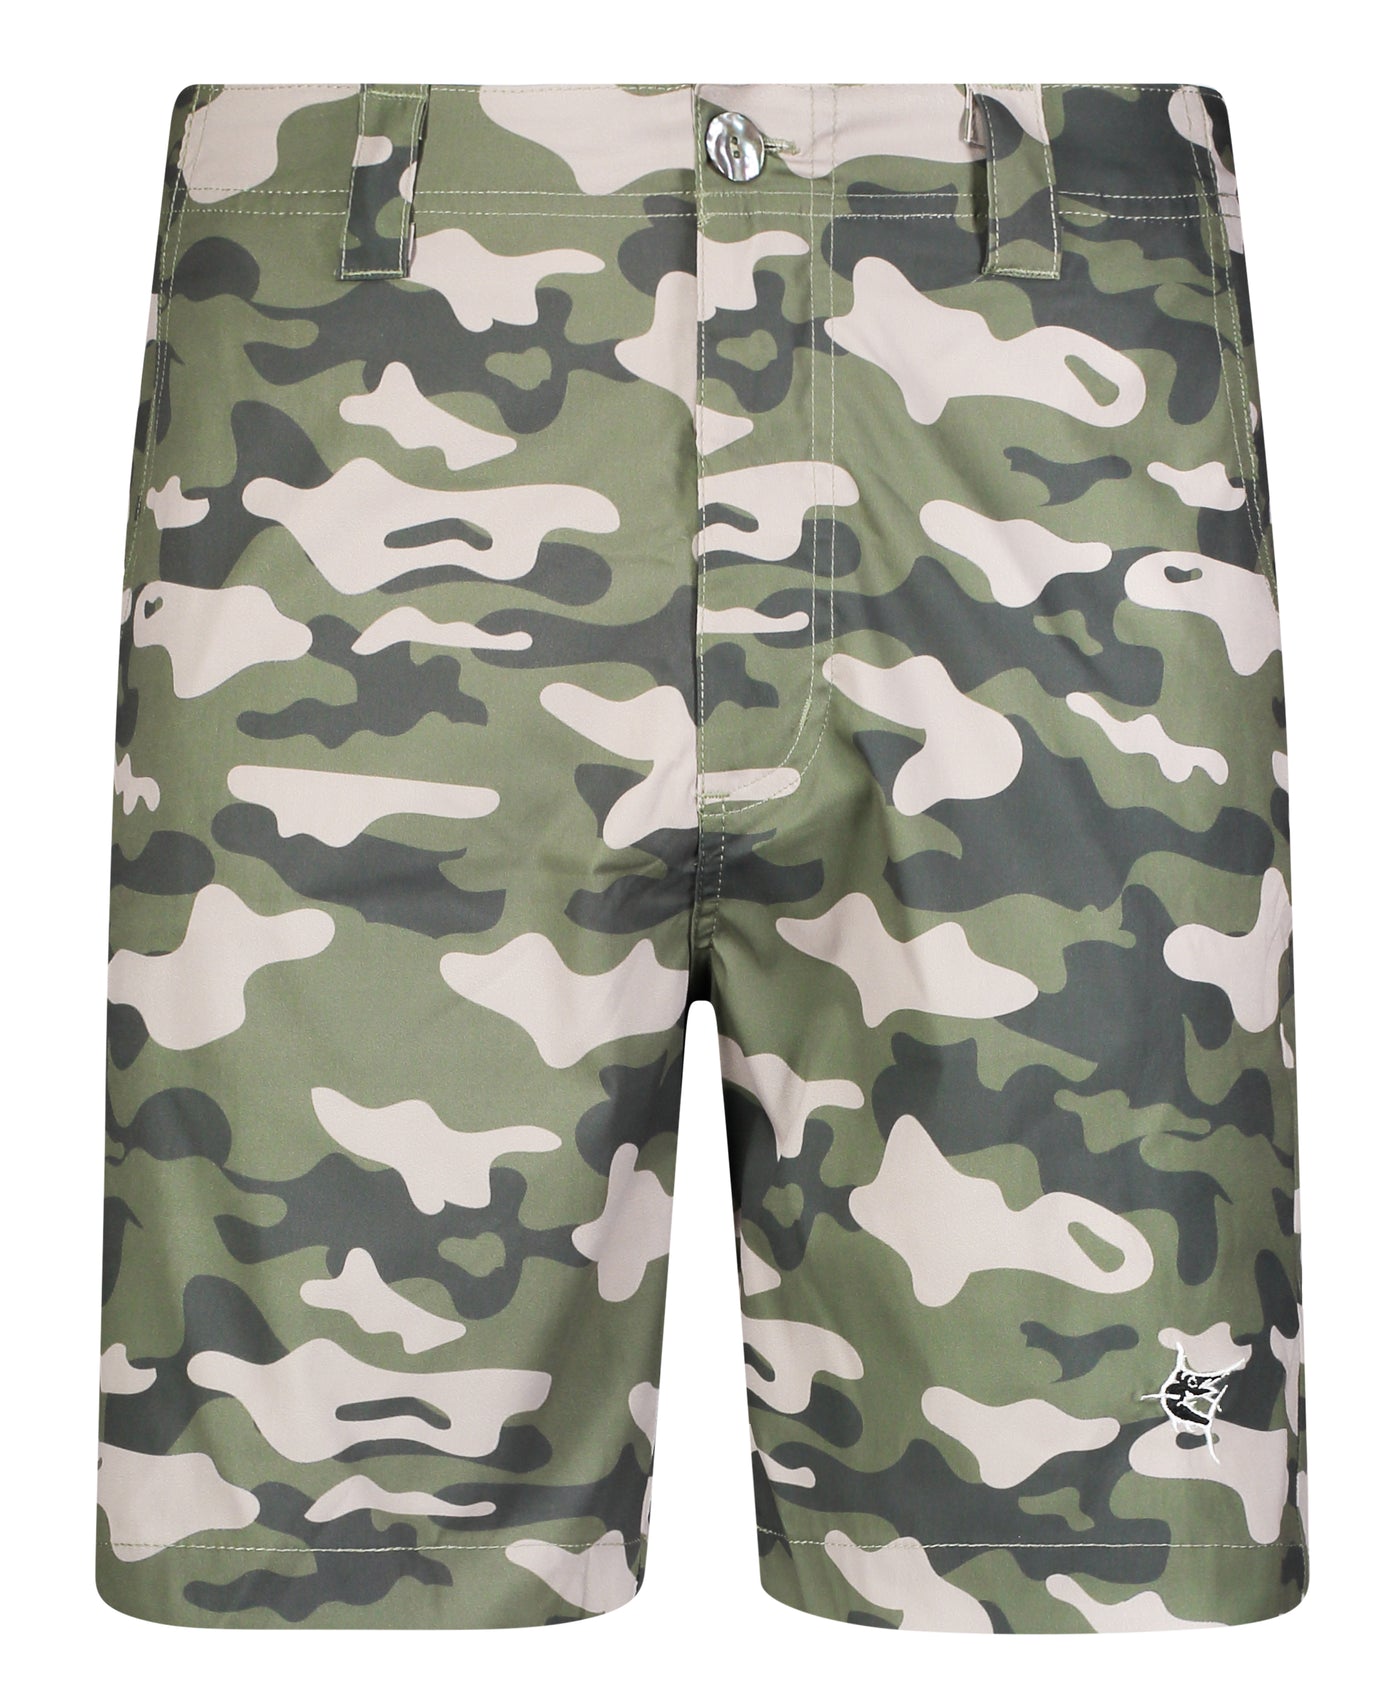 Camo Tactical Shorts Light Weight Cotton Stretch – White Water Life